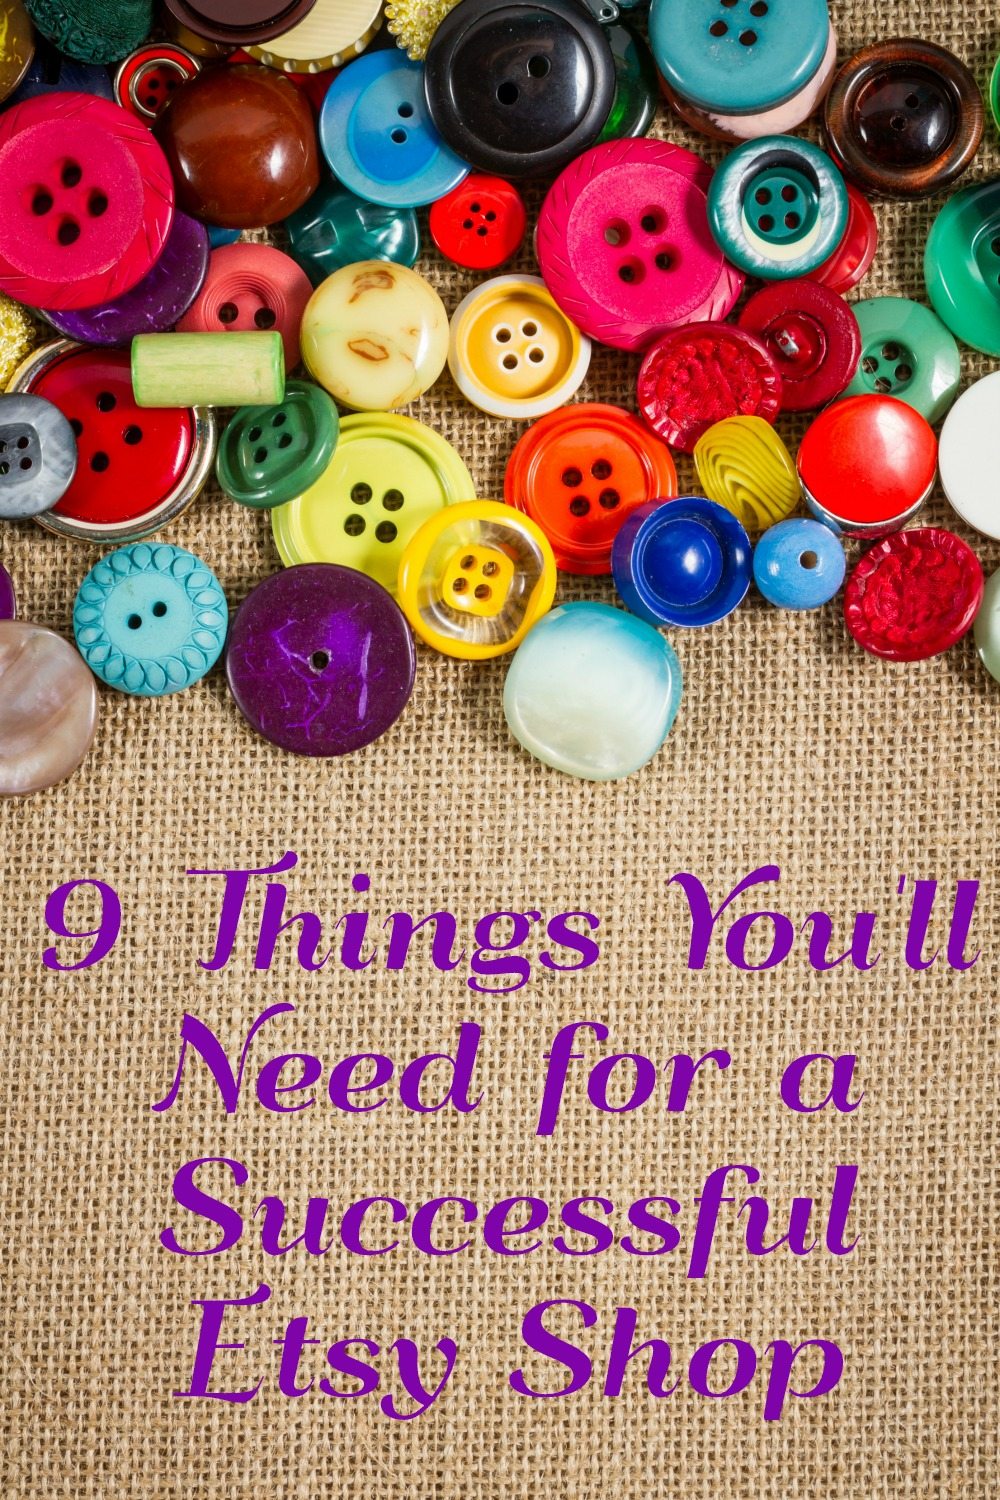 9 Things You Will Need for a Successful Etsy Shop